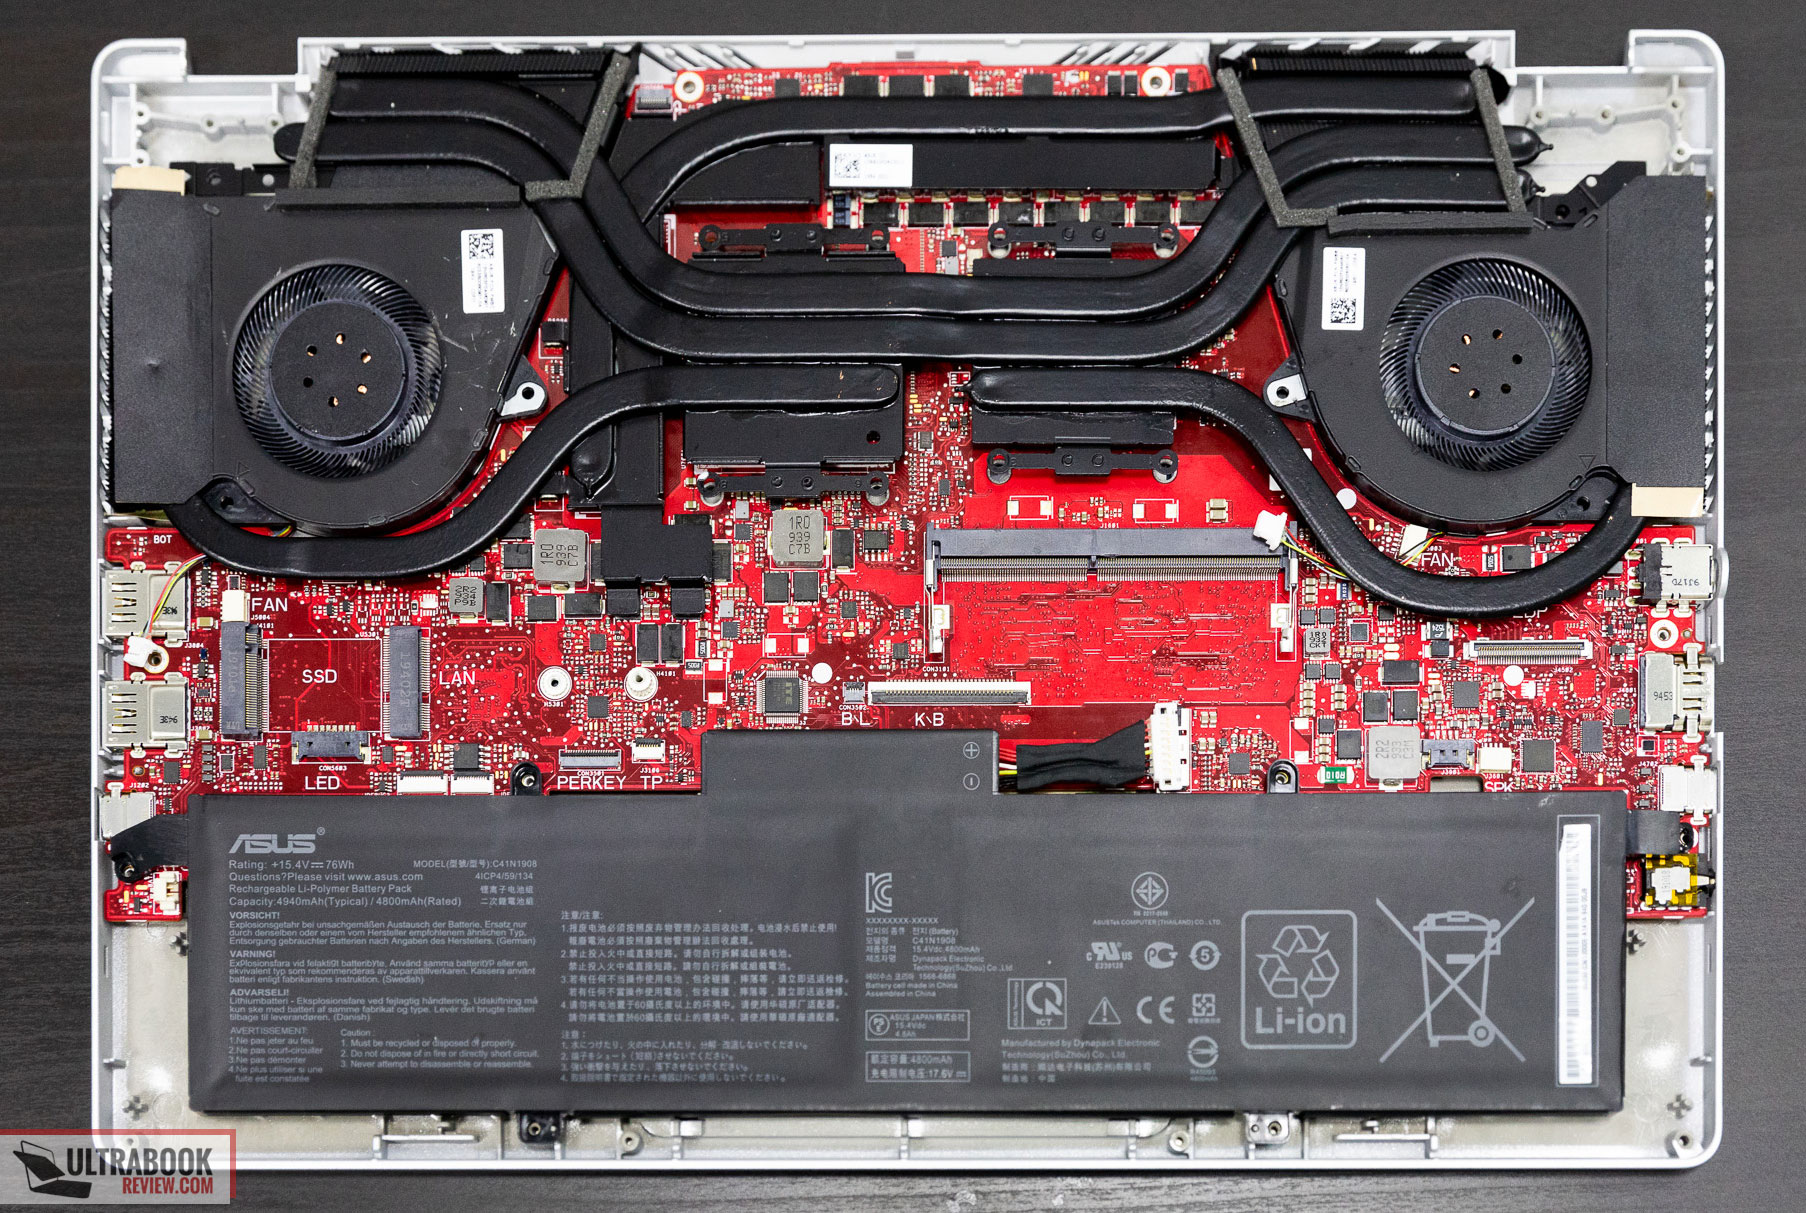 Asus Zephyrus G14 internals and dissasembly